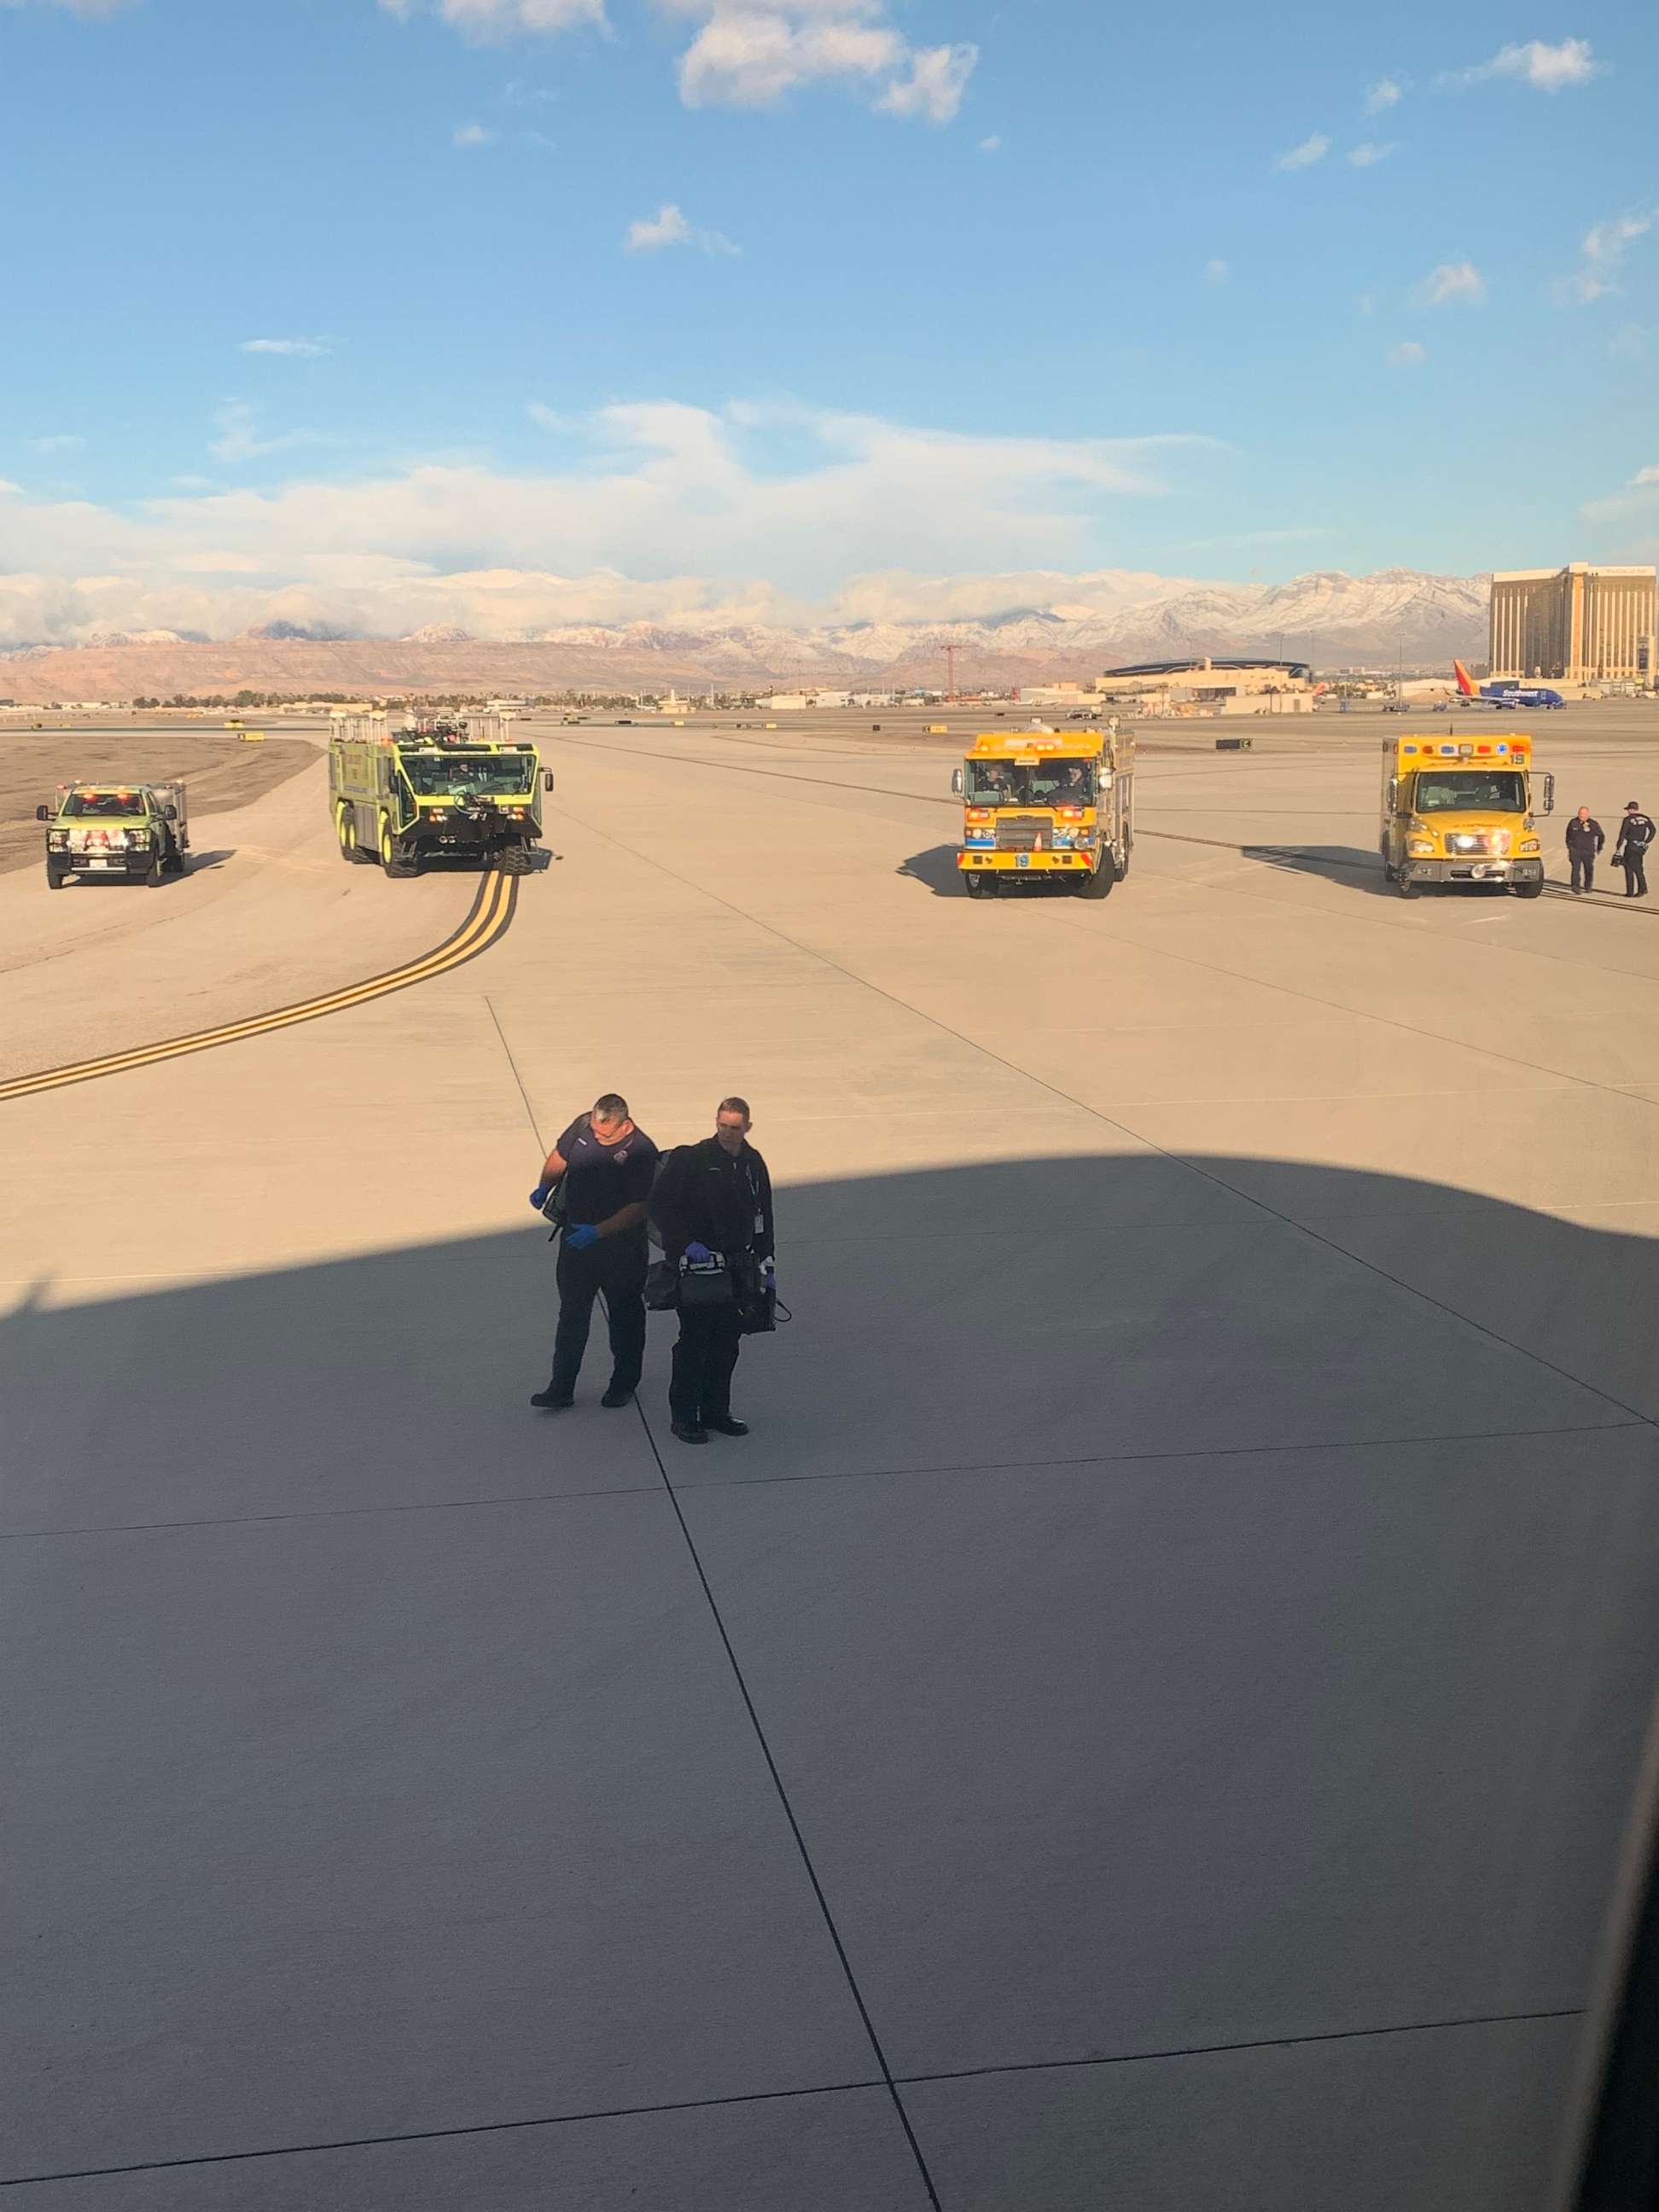 PHOTO: Southwest Flight 6013 from Las Vegas to Columbus, Ohio returned to Las Vegas after departure when one of our Pilots needed medical attention, March 22, 2023.